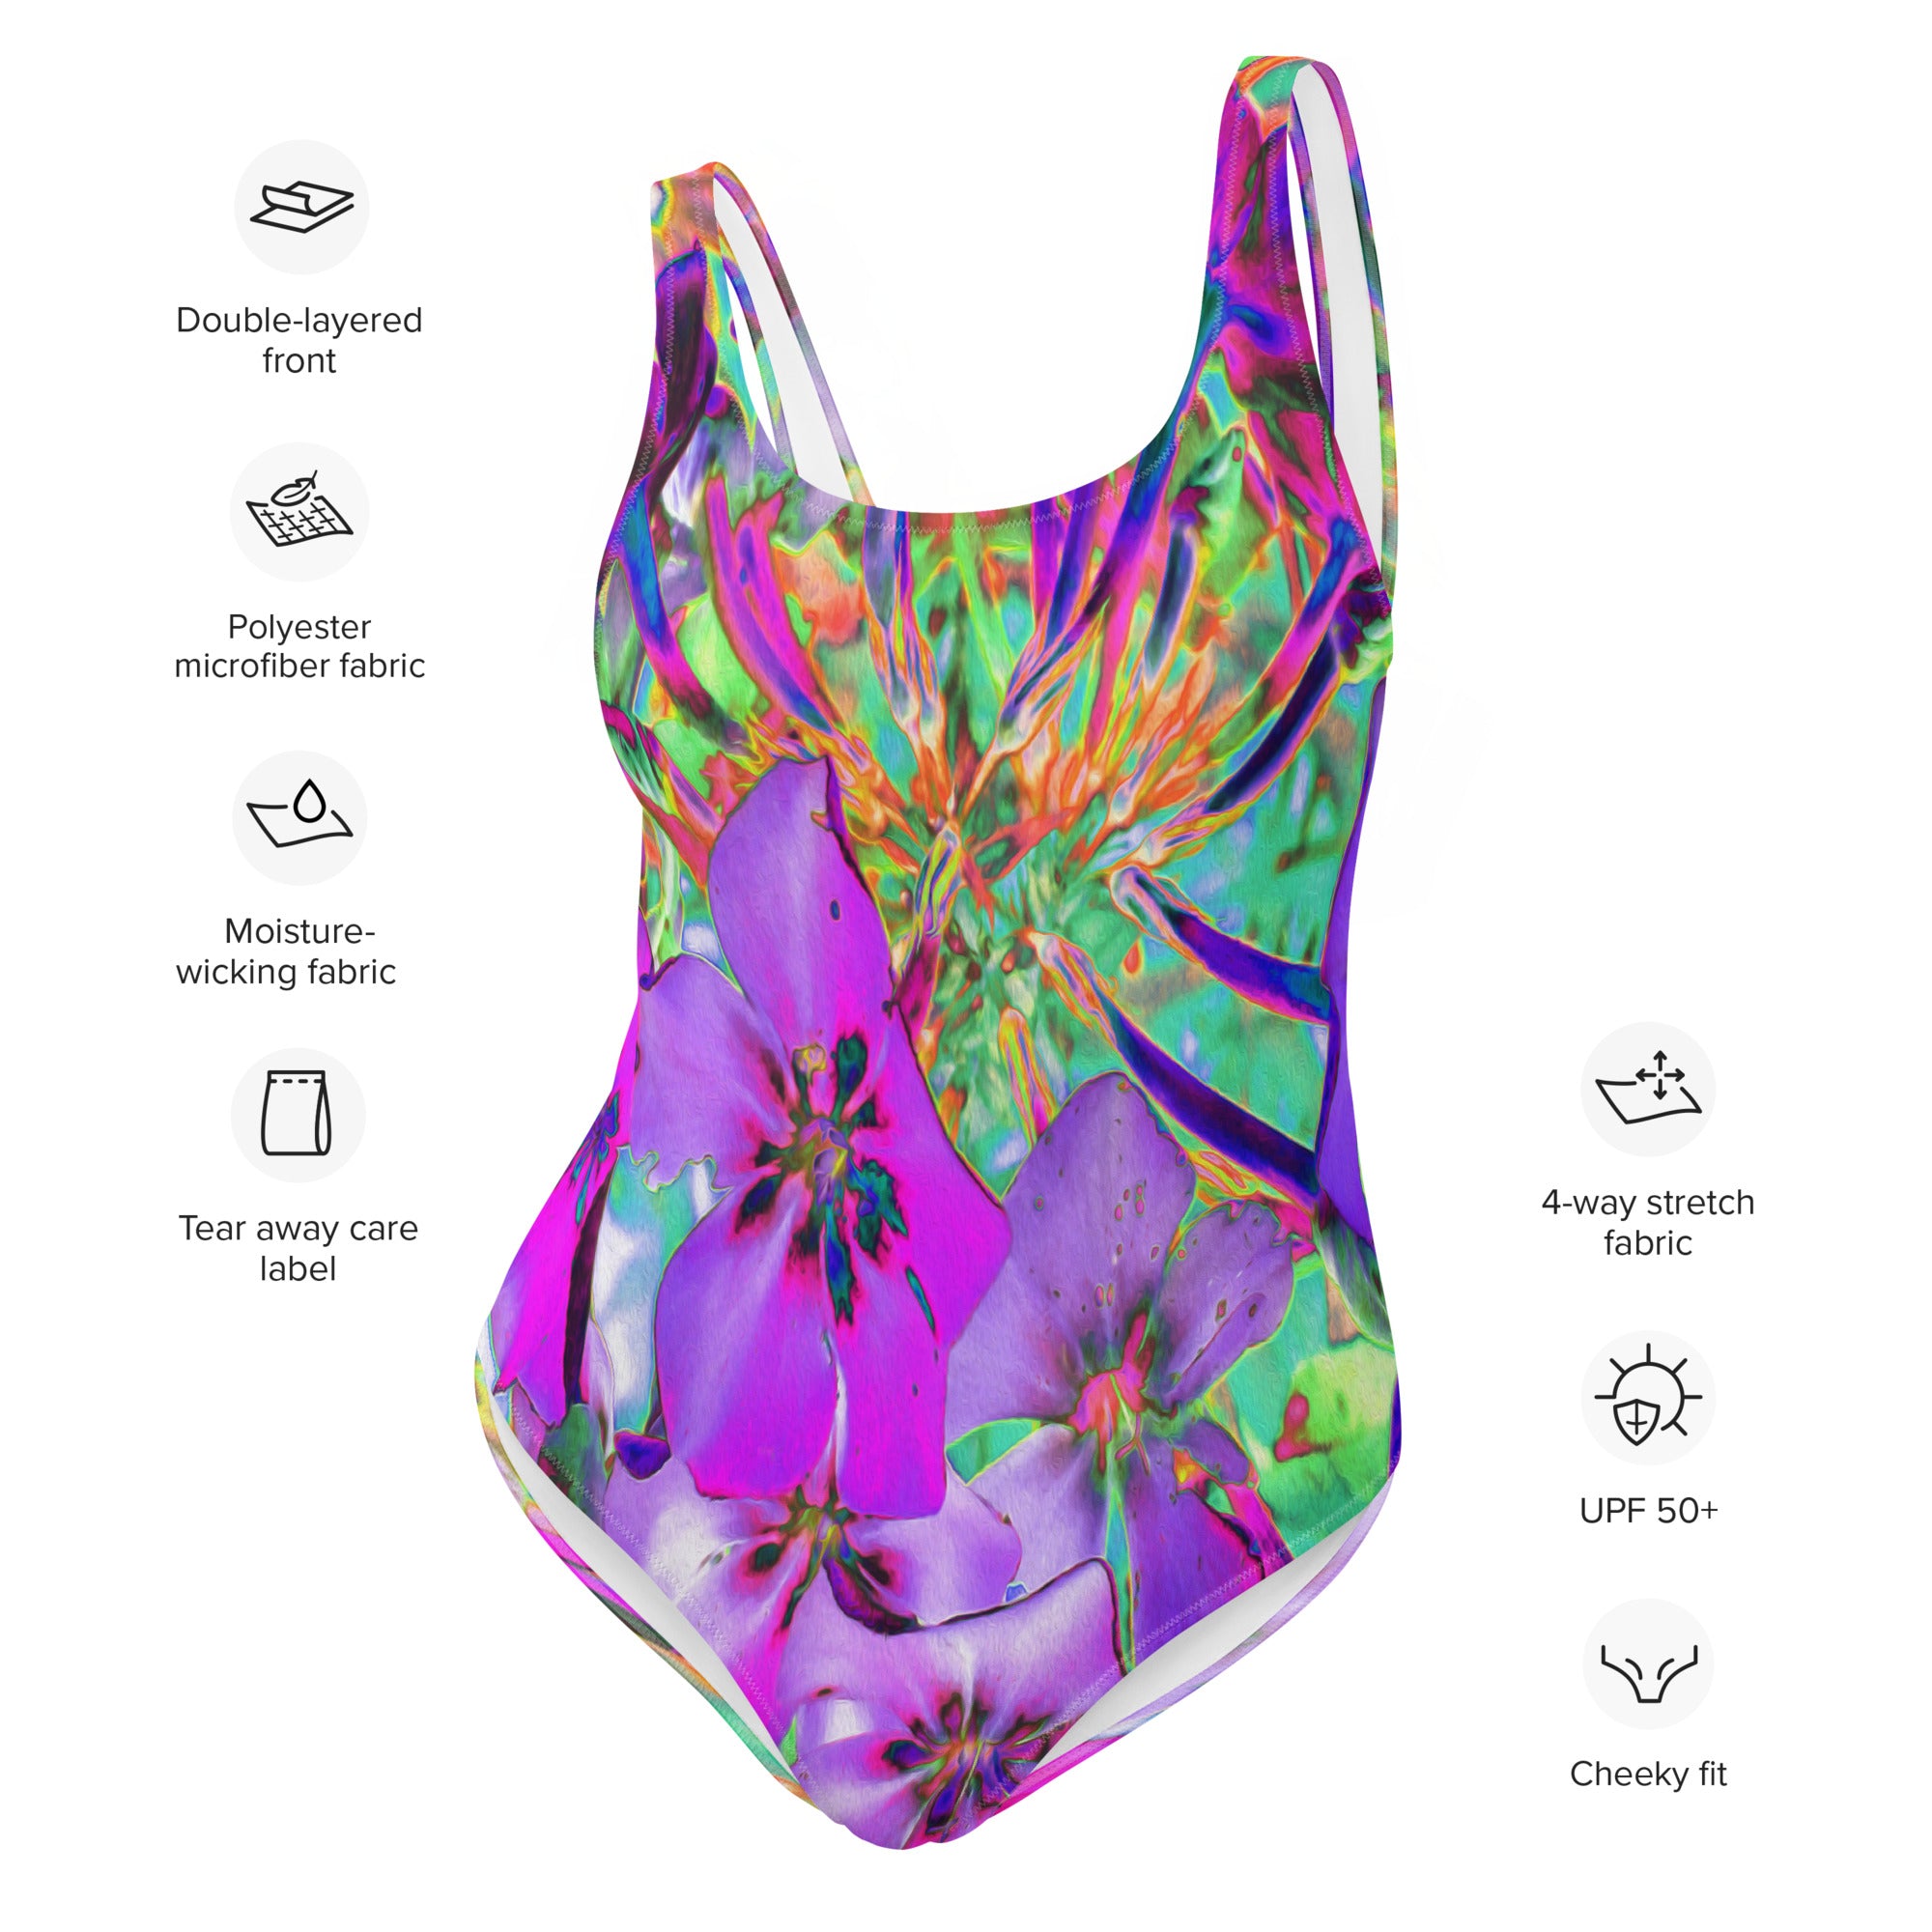 One Piece Swimsuits - Dramatic Psychedelic Magenta and Purple Flowers